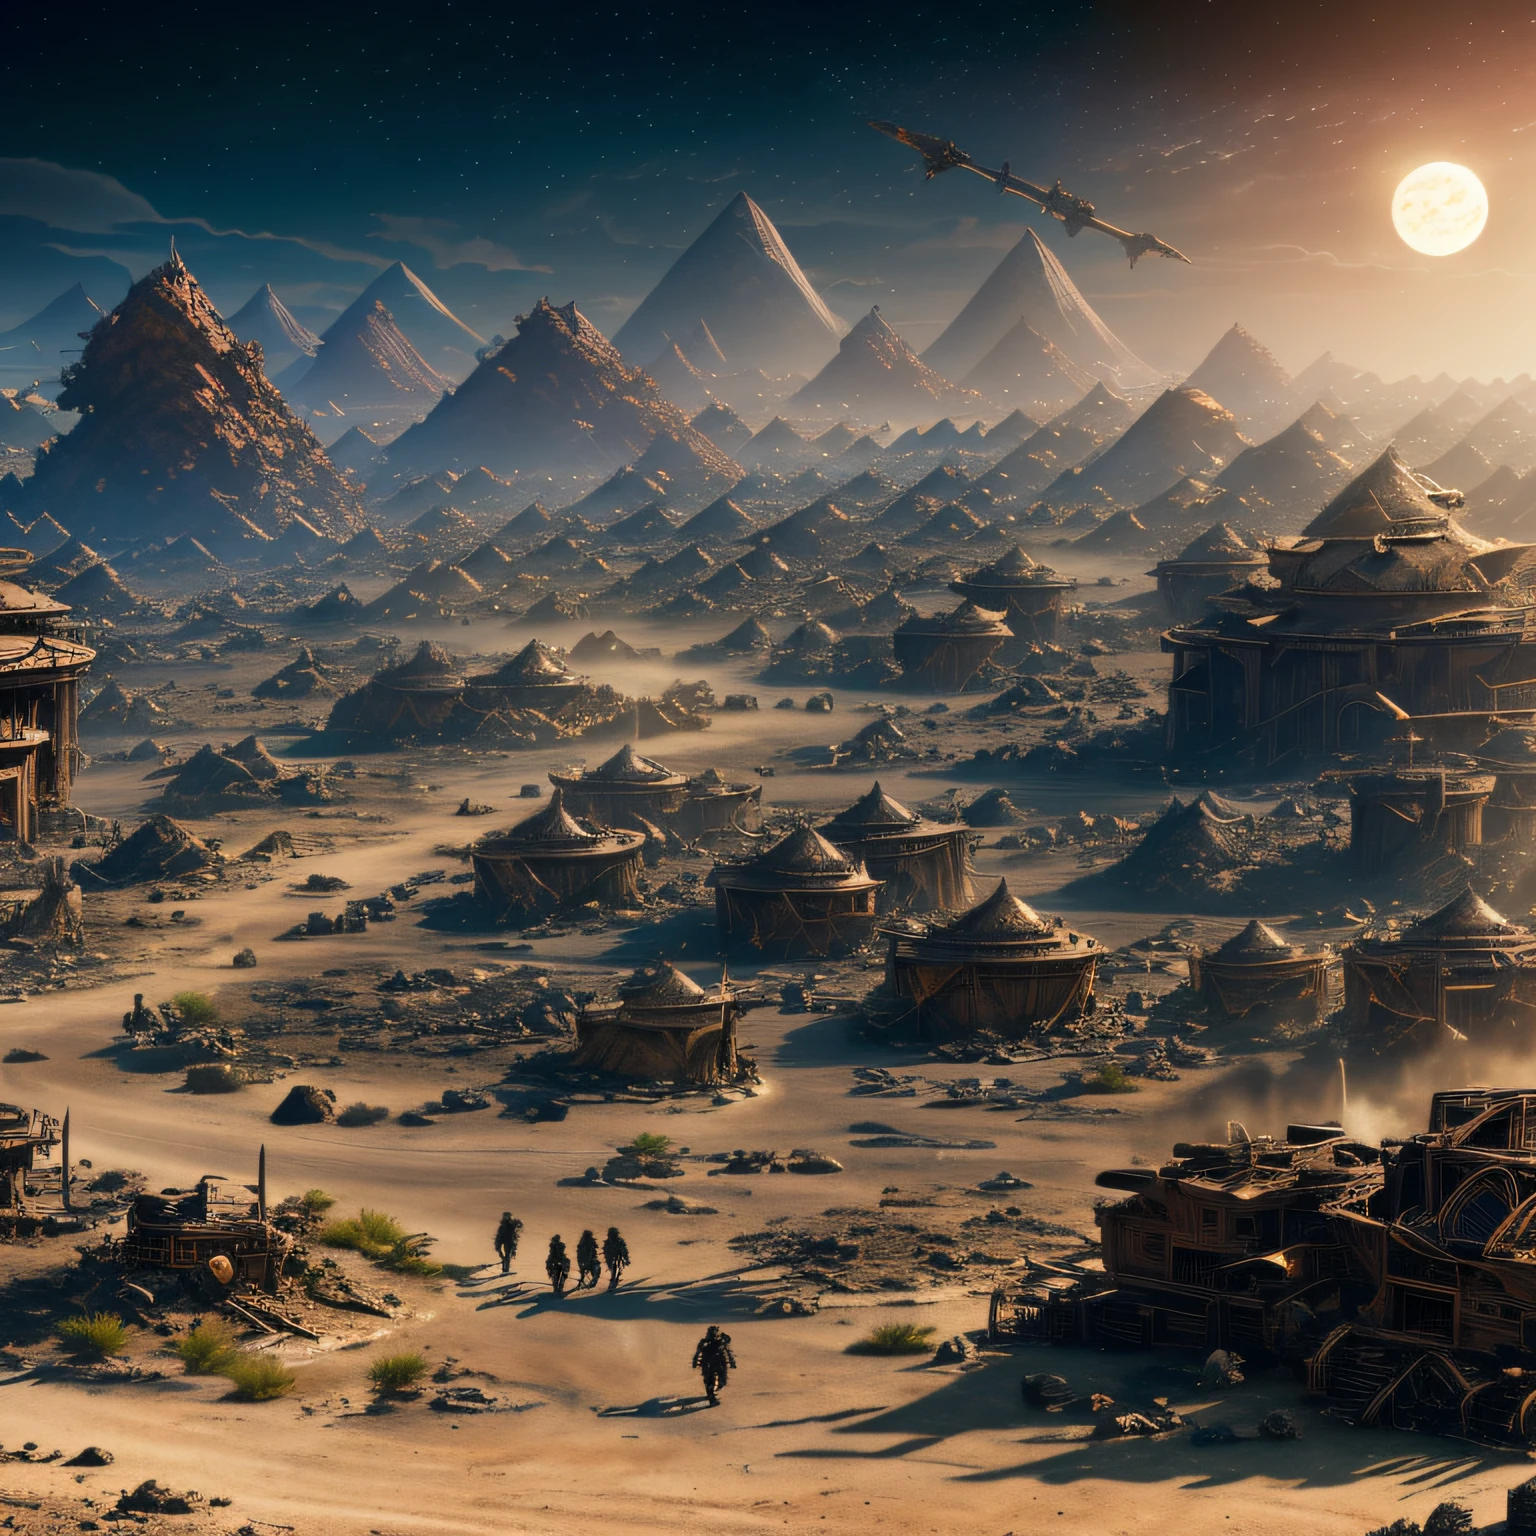 epic video game key visual, giant armored creature, horde, skeletal army, many approaching in an ancient desert windy dust debris storm landscape midnight moonlight foreground debris
(zrpgstyle) (masterpiece:1.2) (illustration:1.1) (best quality:1.2) (detailed) (intricate) (8k) (HDR) (wallpaper) (cinematic lighting) (sharp focus) --auto